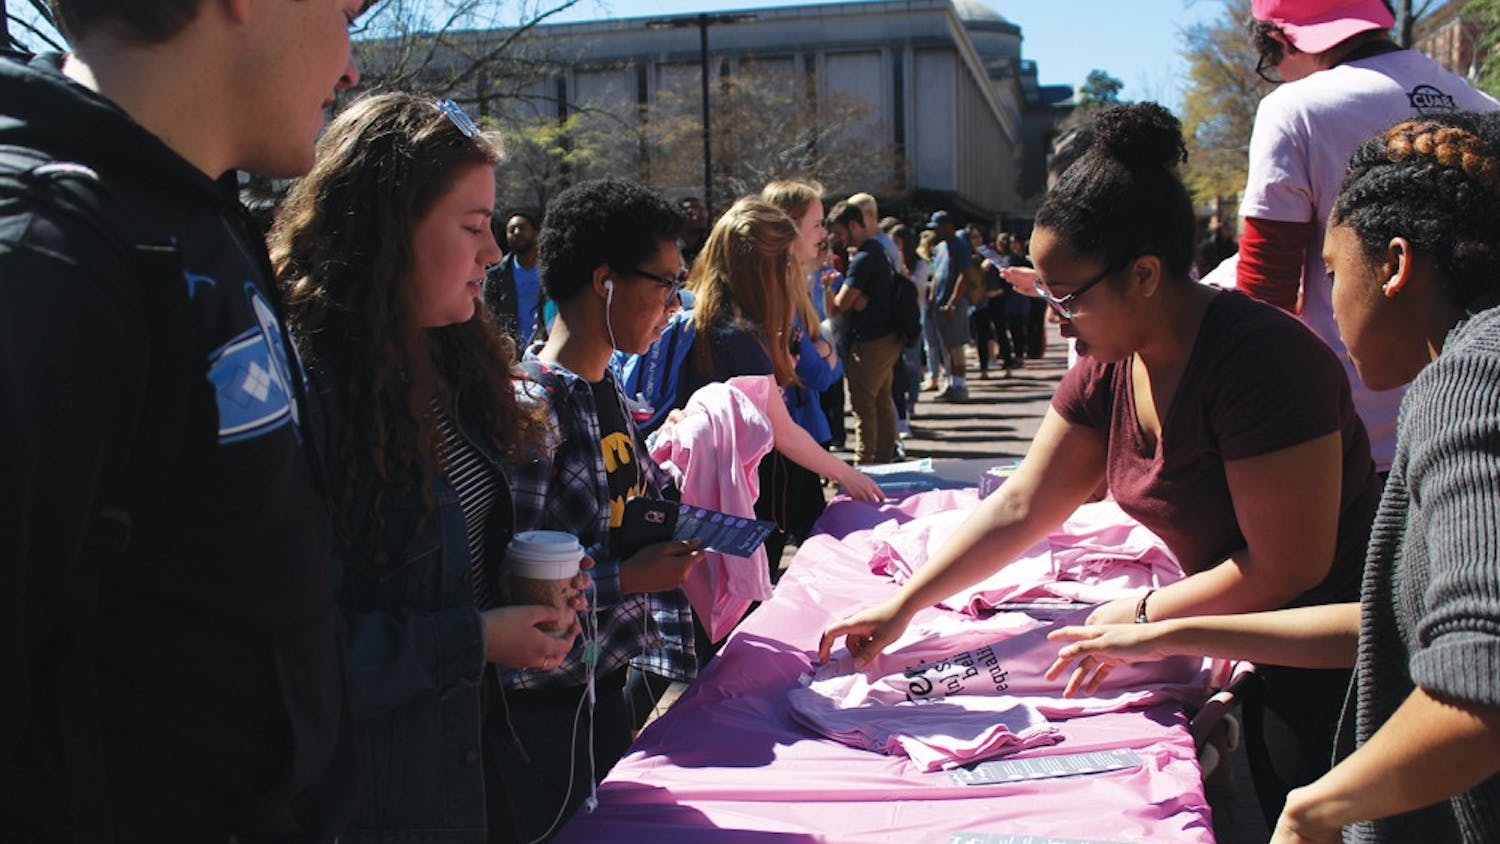 CUAB held various events Wednesday afternoon in honor of International Women's Day, including a feminist T-shirt giveaway in the pit.